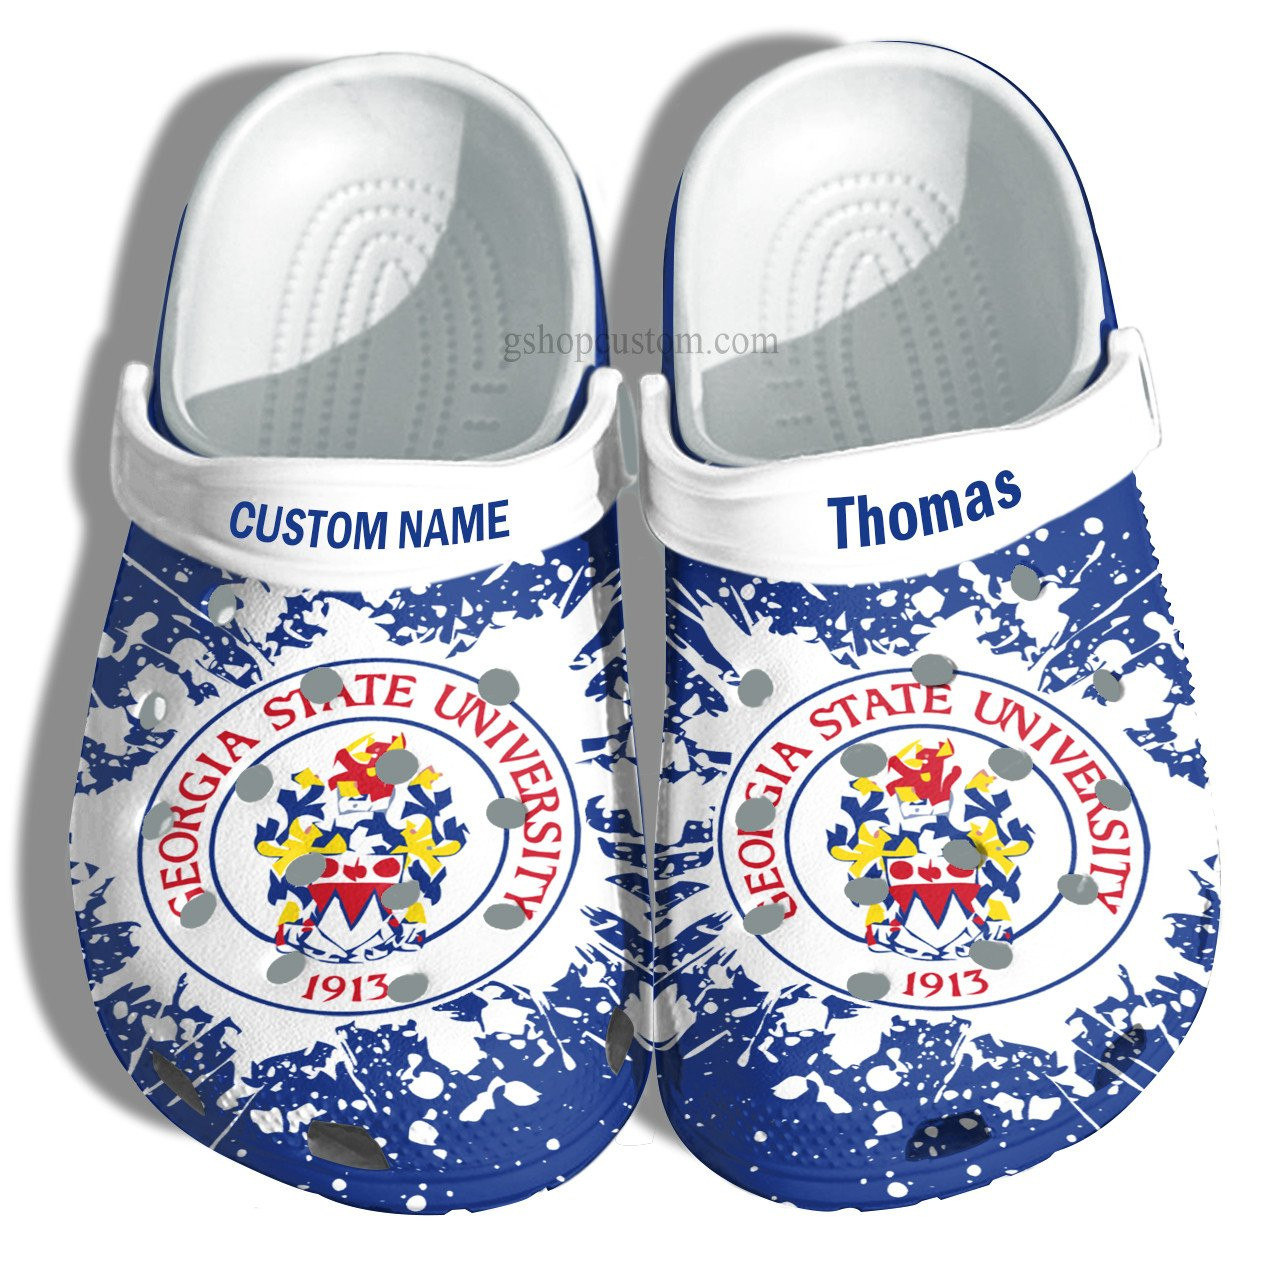 Georgia State University Graduation Gifts Croc Shoes Customize- Admission Gift Crocs Shoes